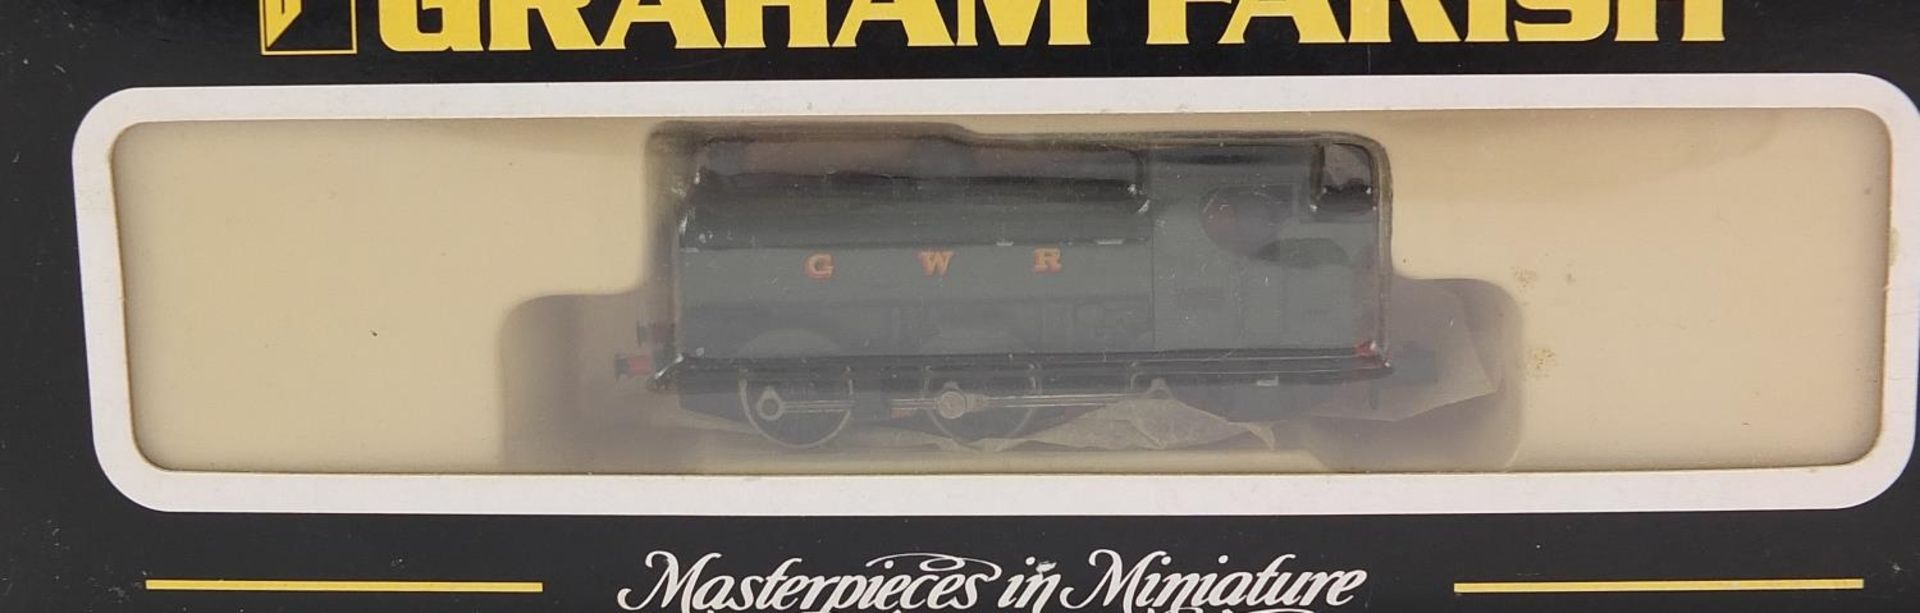 Two Graham Farish N gauge model railway locomotives with cases and boxes by Bachmann comprising - Image 2 of 3